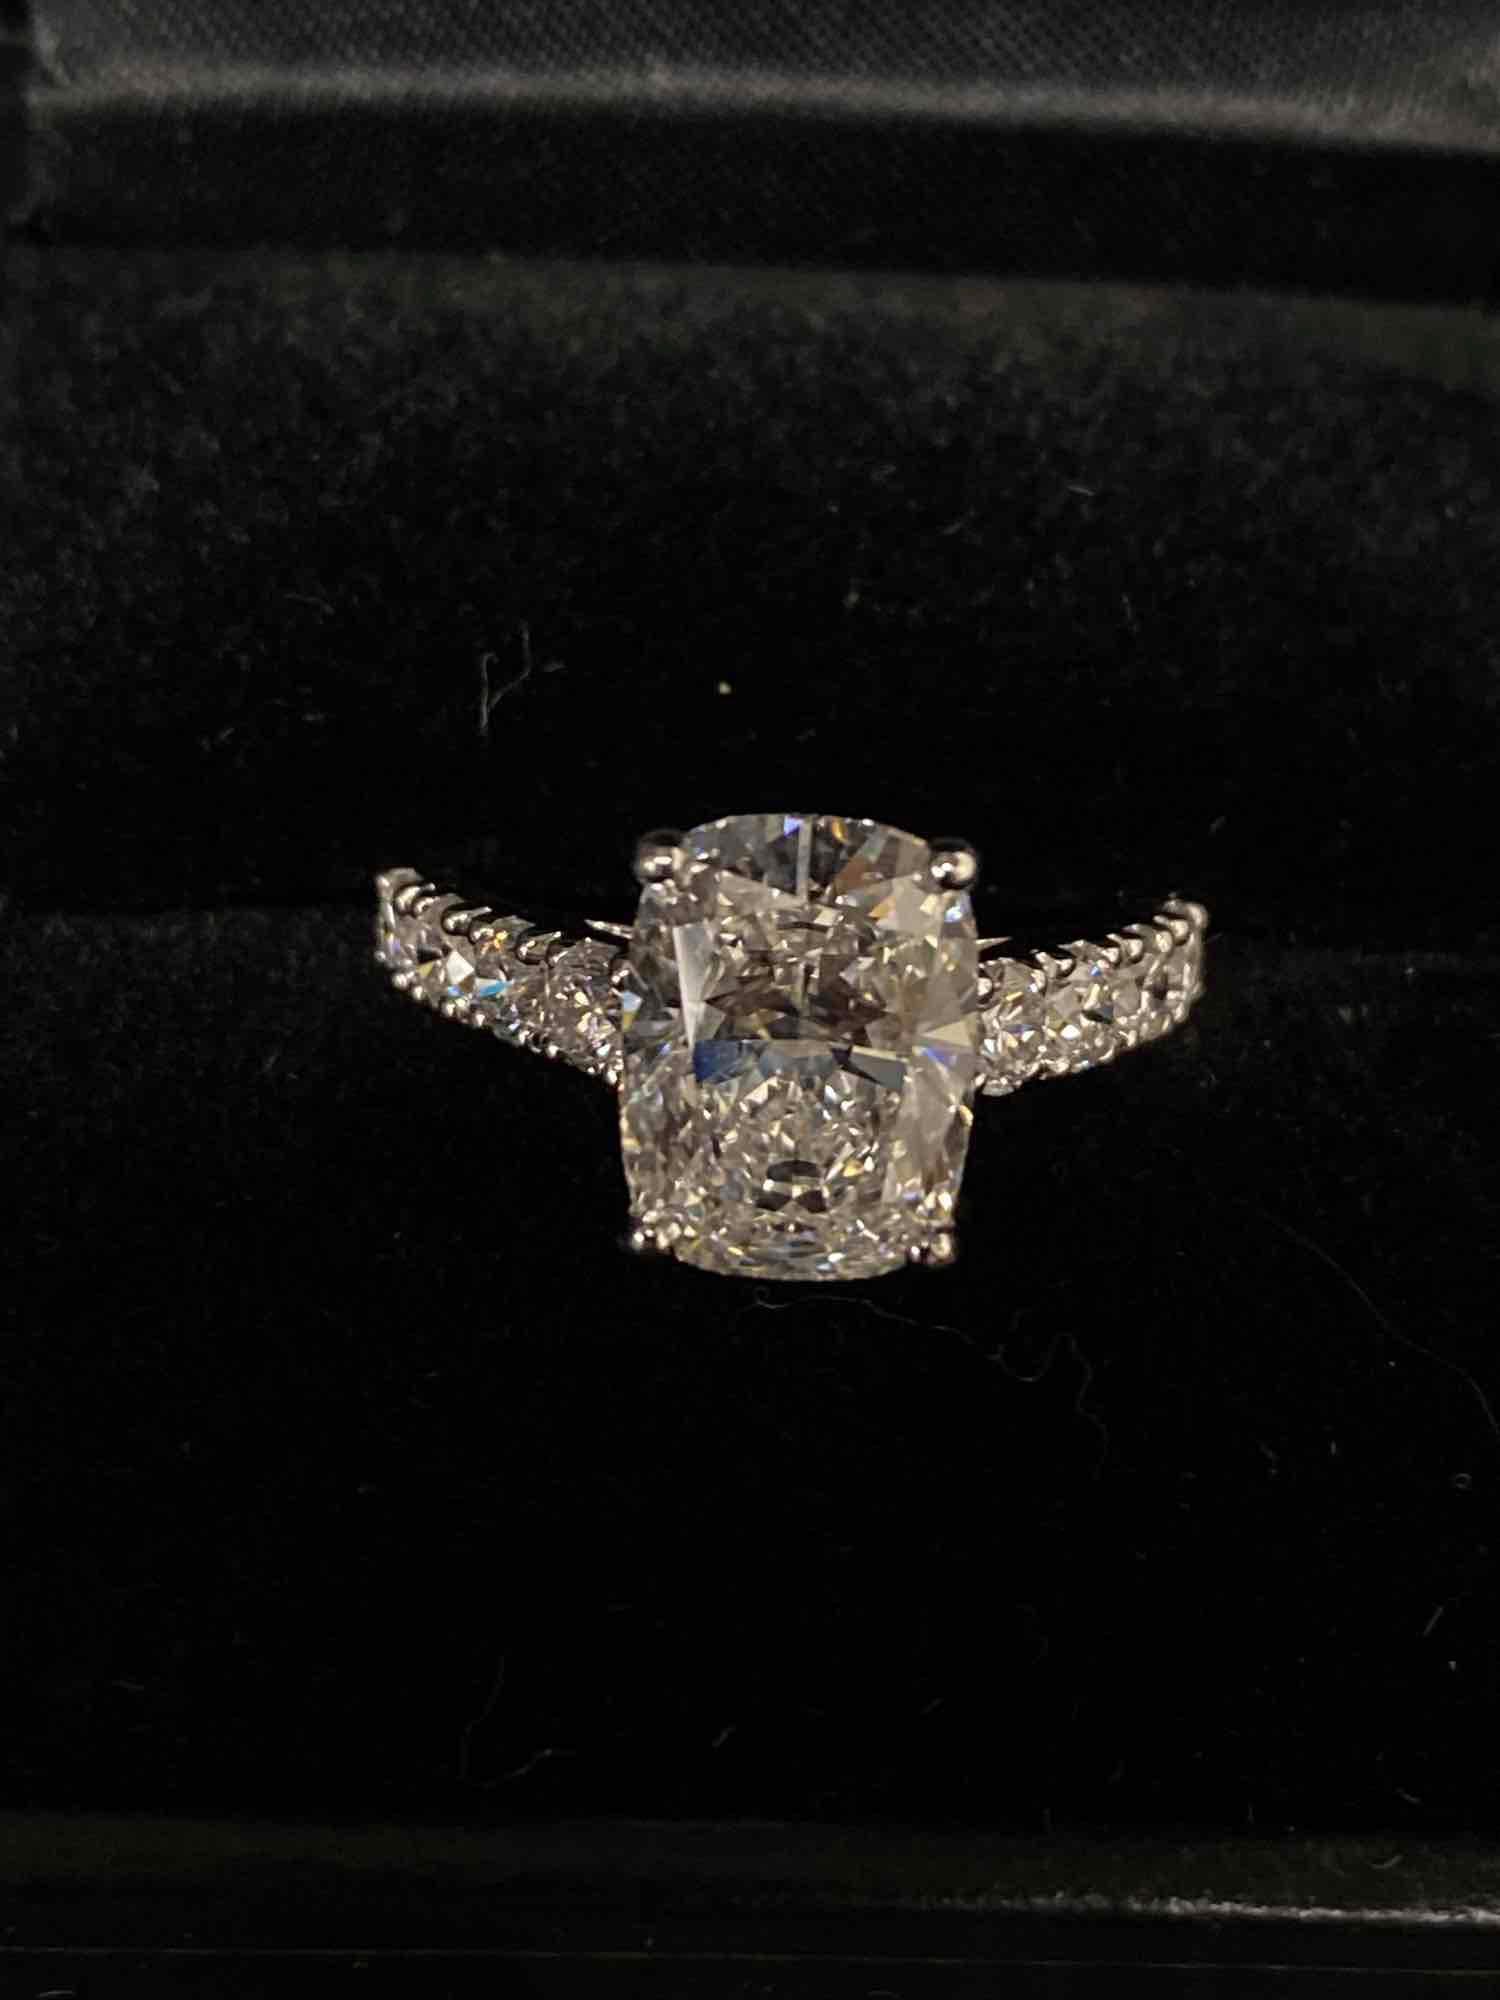 One Cushion CVD Diamond 3.05ct Set, 14k White Gold Complimented by 8 Round Diamonds (Lab Created)